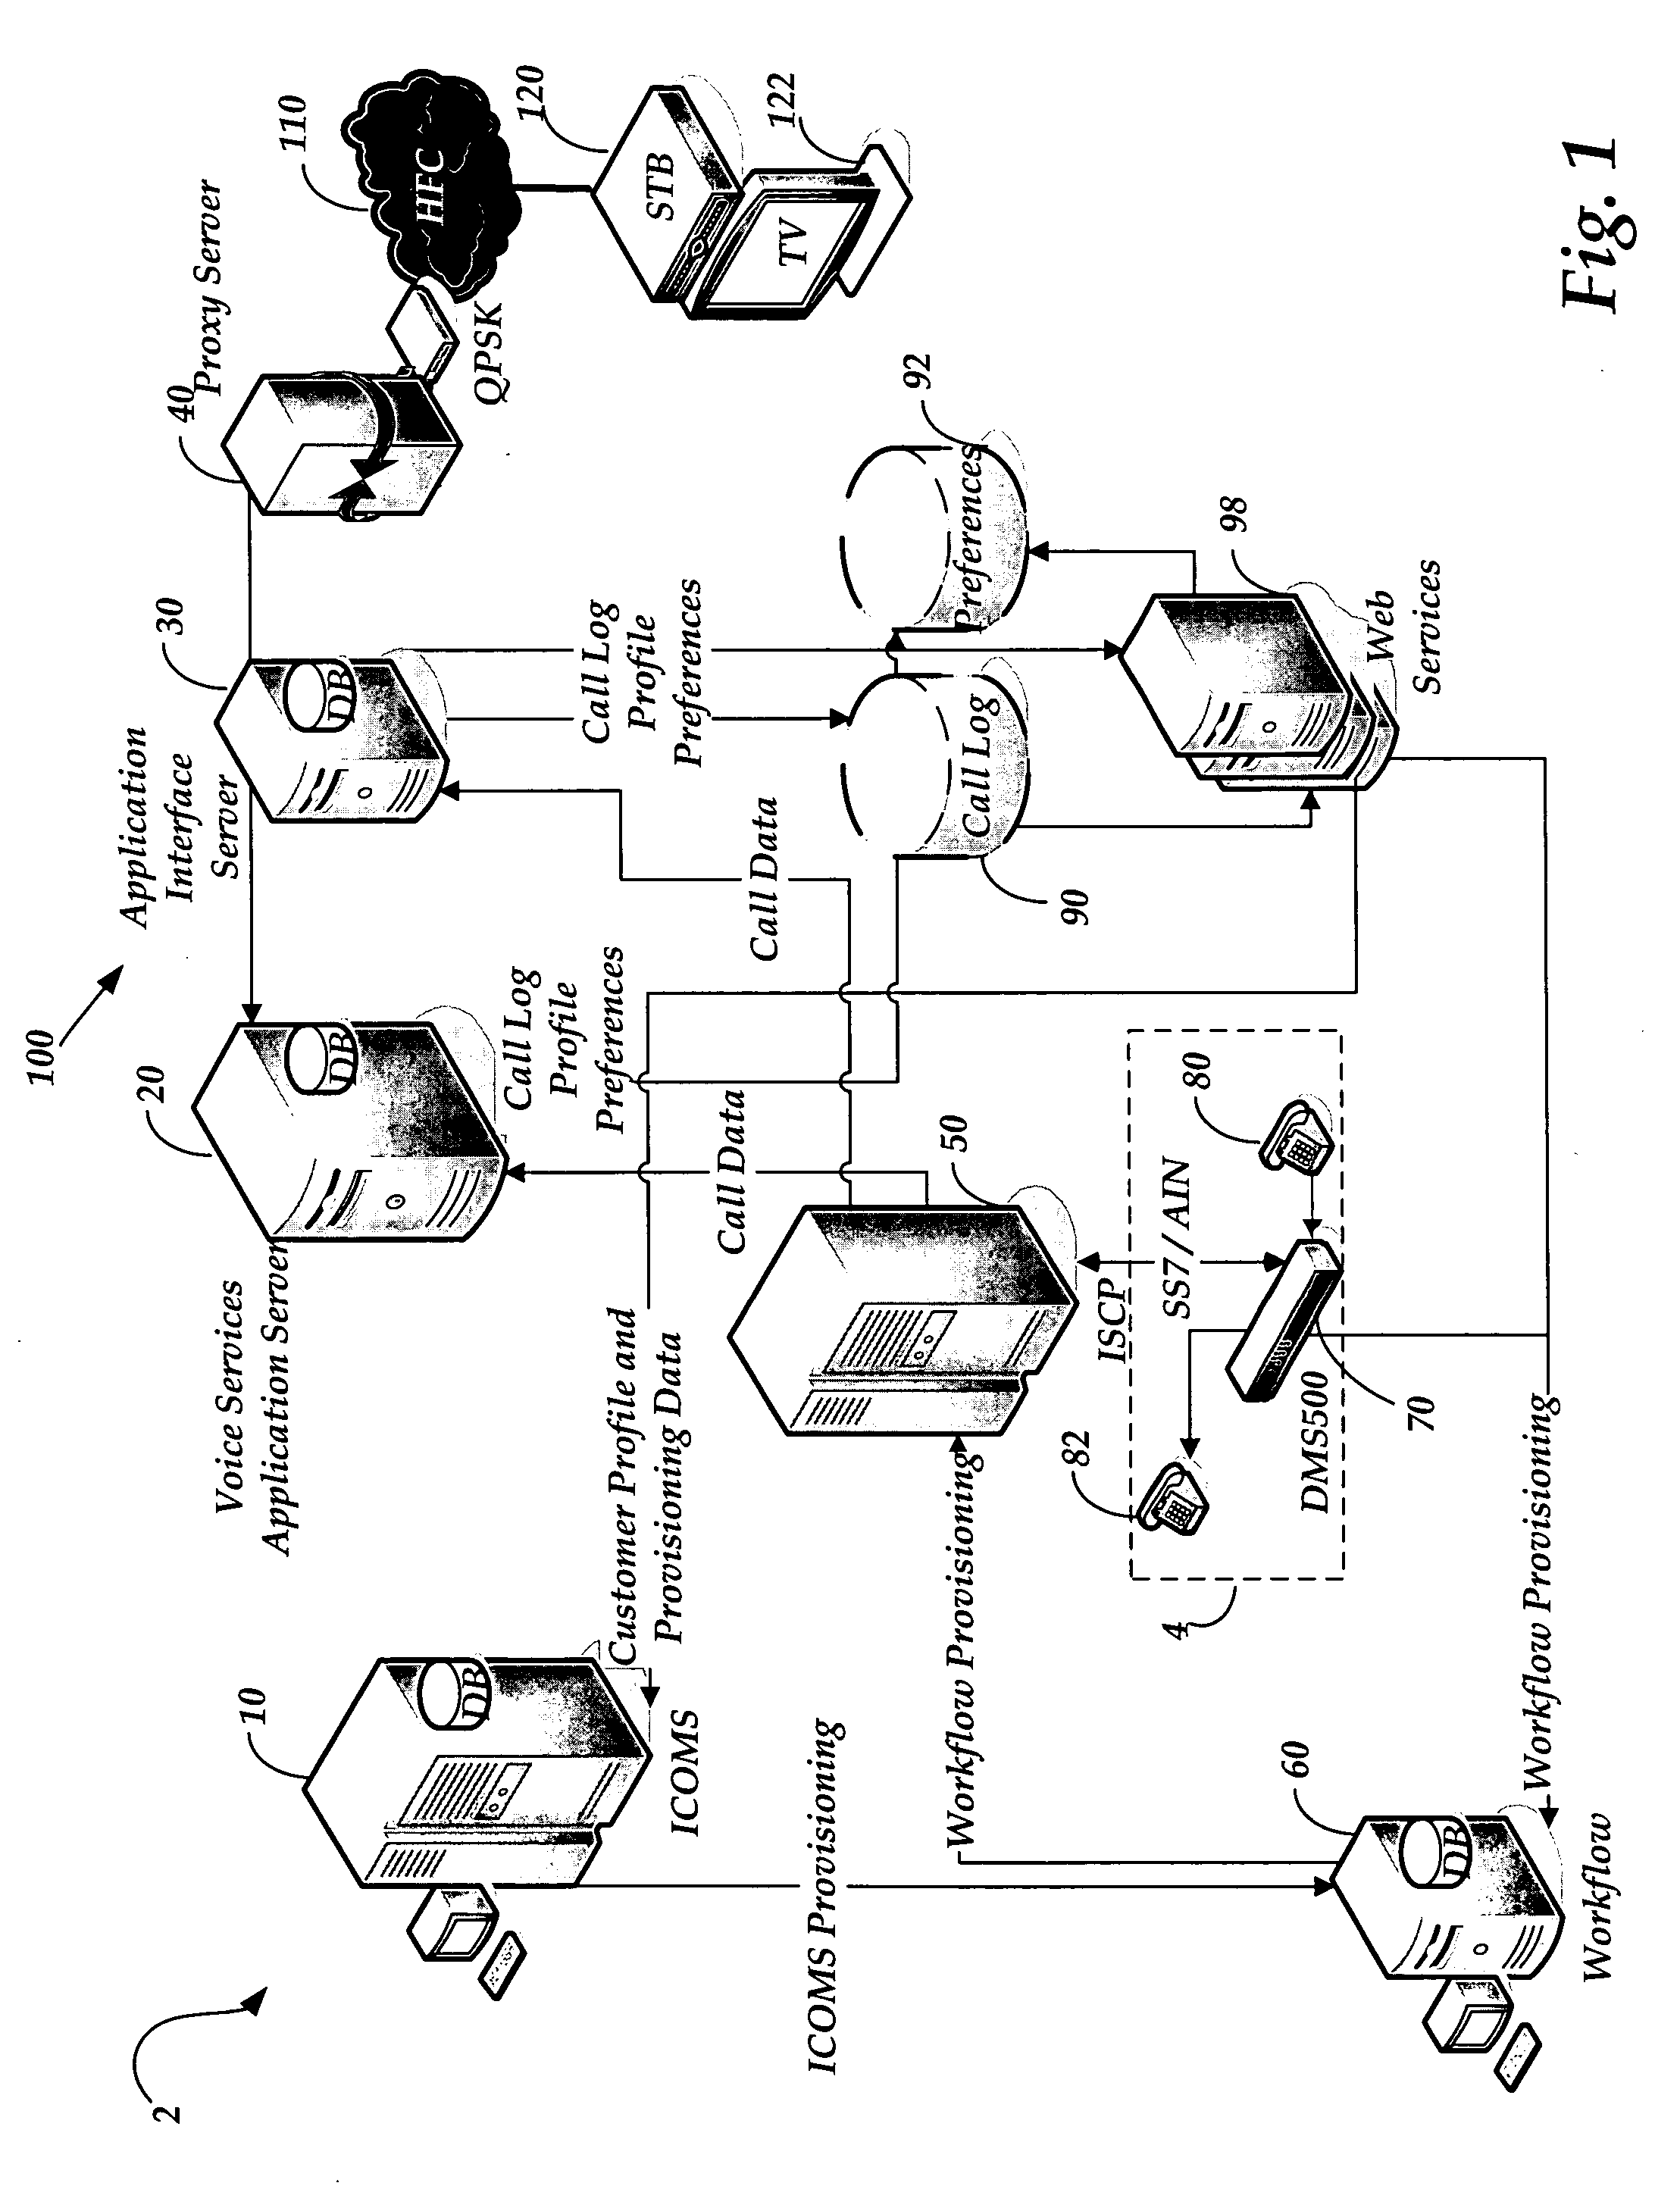 Method and system for real-time notification and disposition of voice services in a cable services network